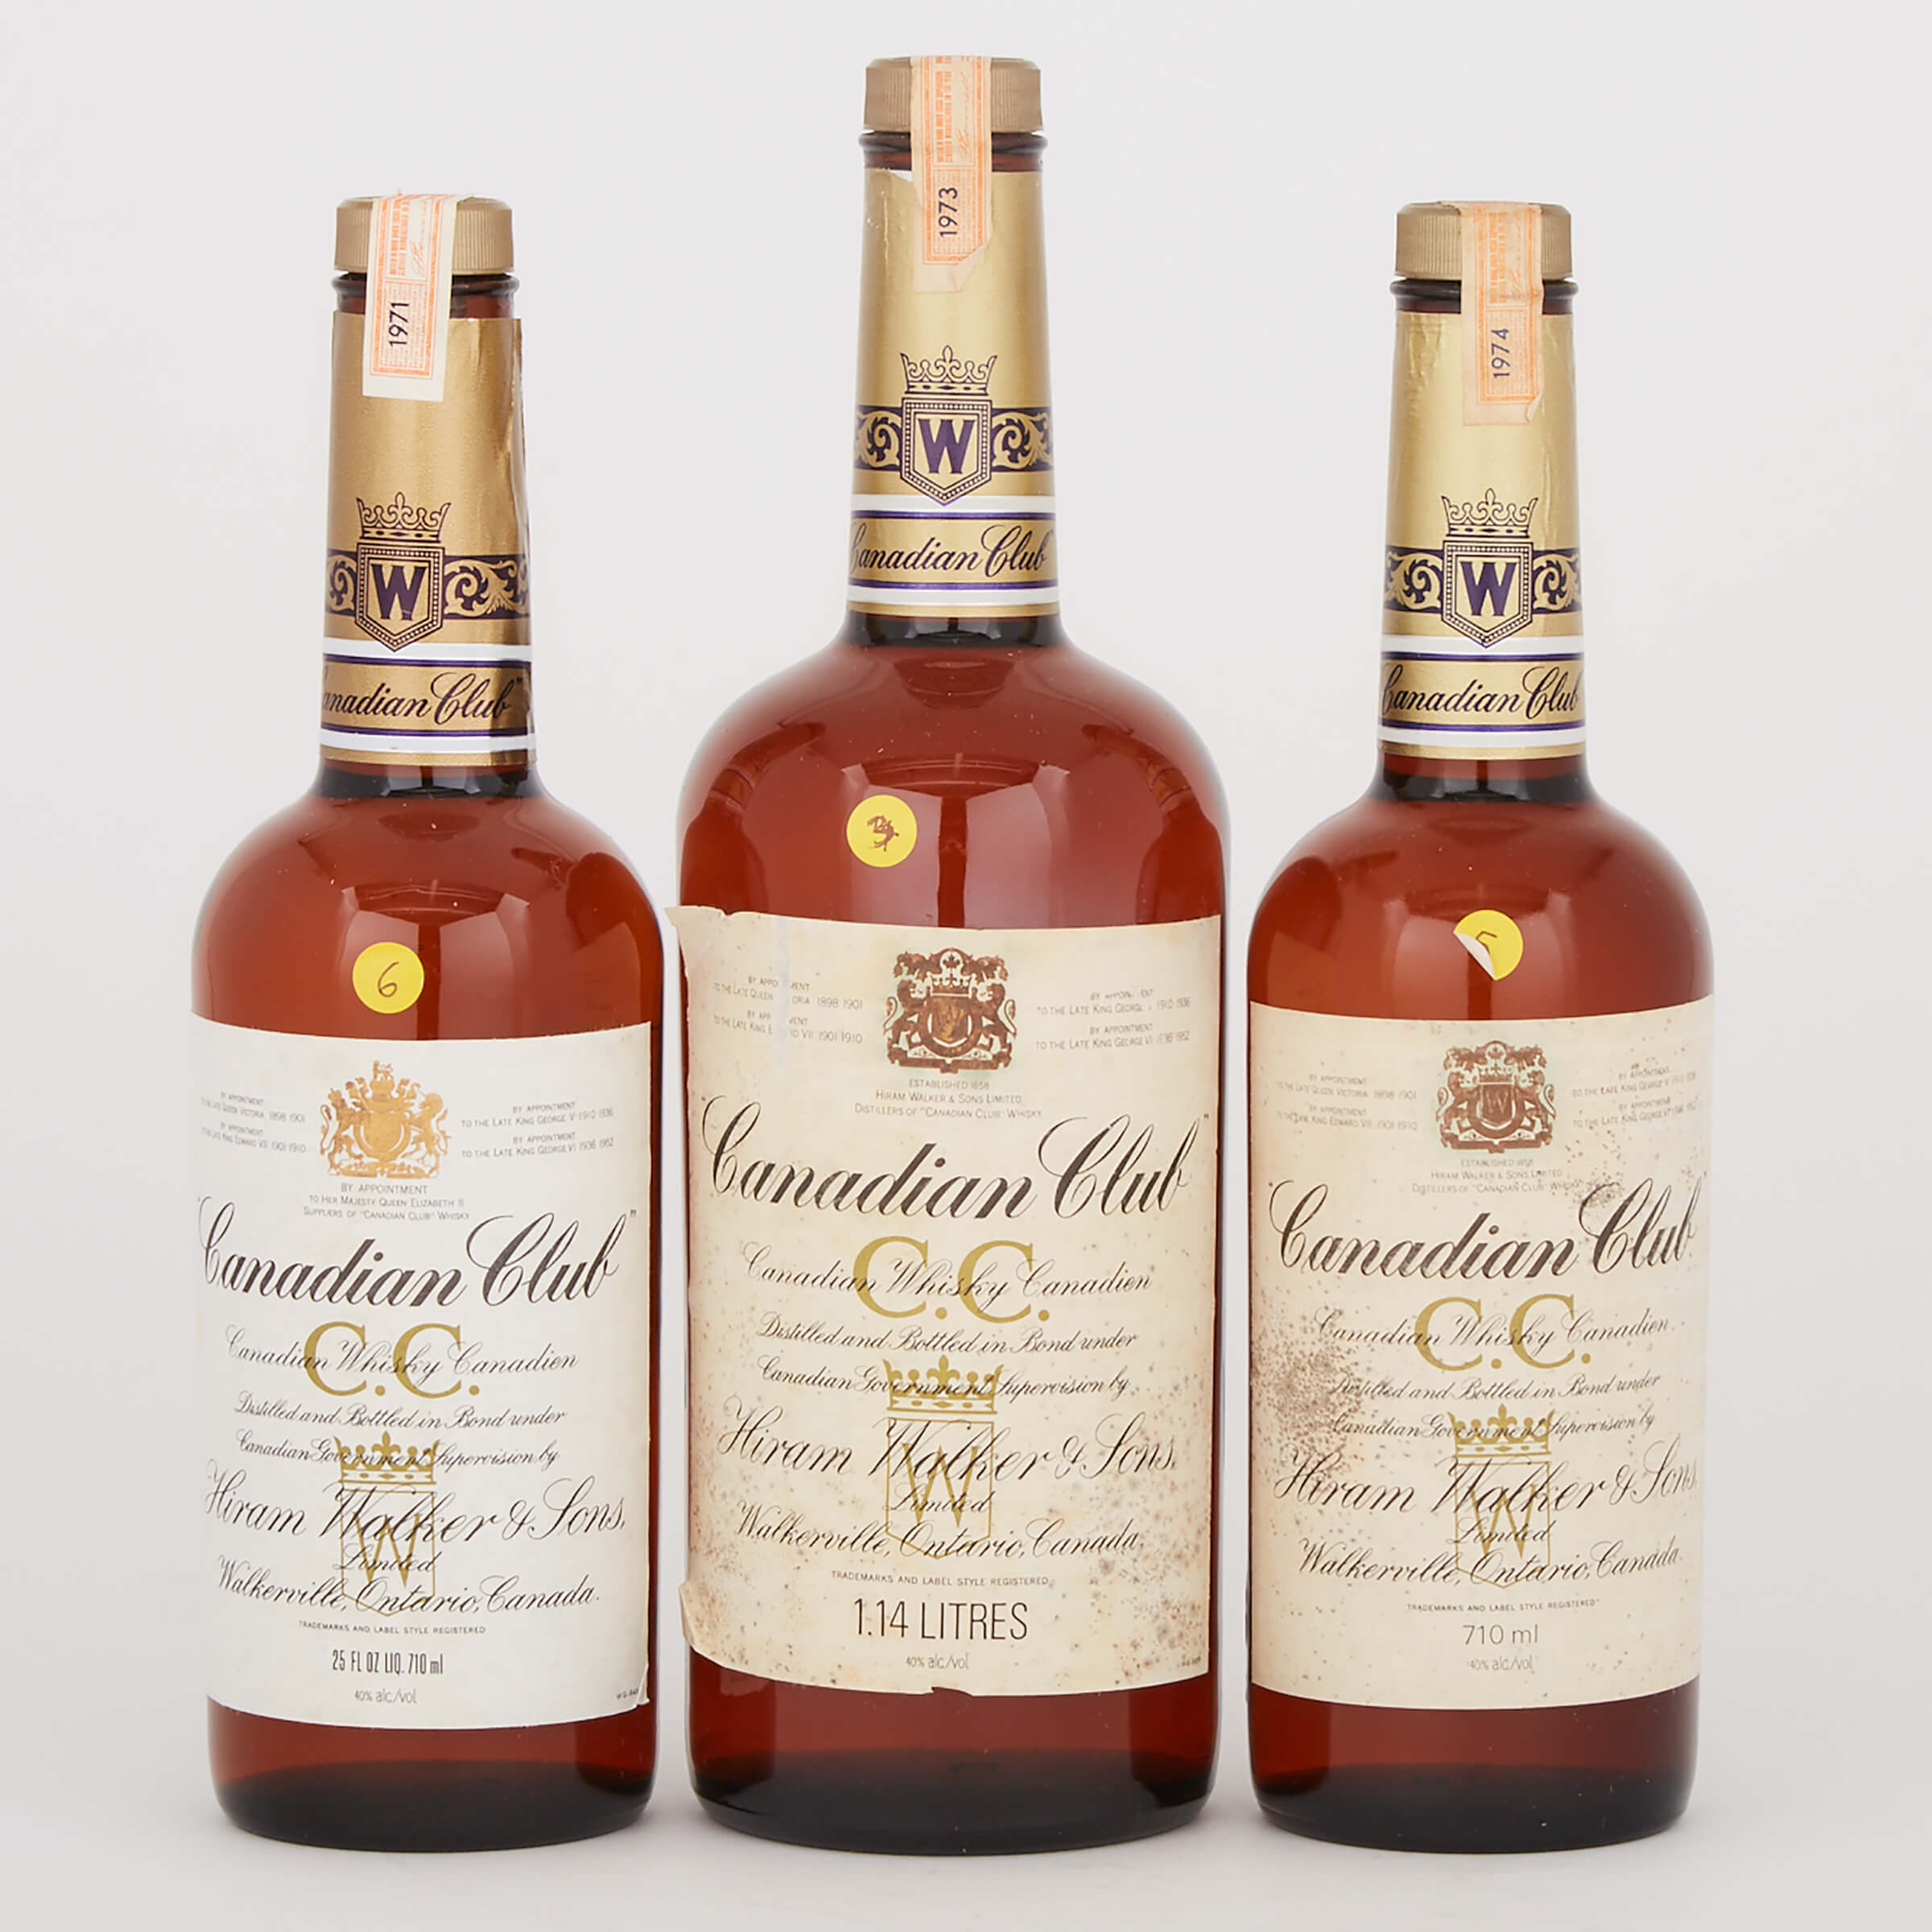 CANADIAN CLUB CANADIAN WHISKY (ONE 710 ML)
CANADIAN CLUB PREMIUM CANADIAN WHISKY (ONE 710 ML)
CANADIAN CLUB PREMIUM CANADIAN WHISKY (ONE 1140 ML)